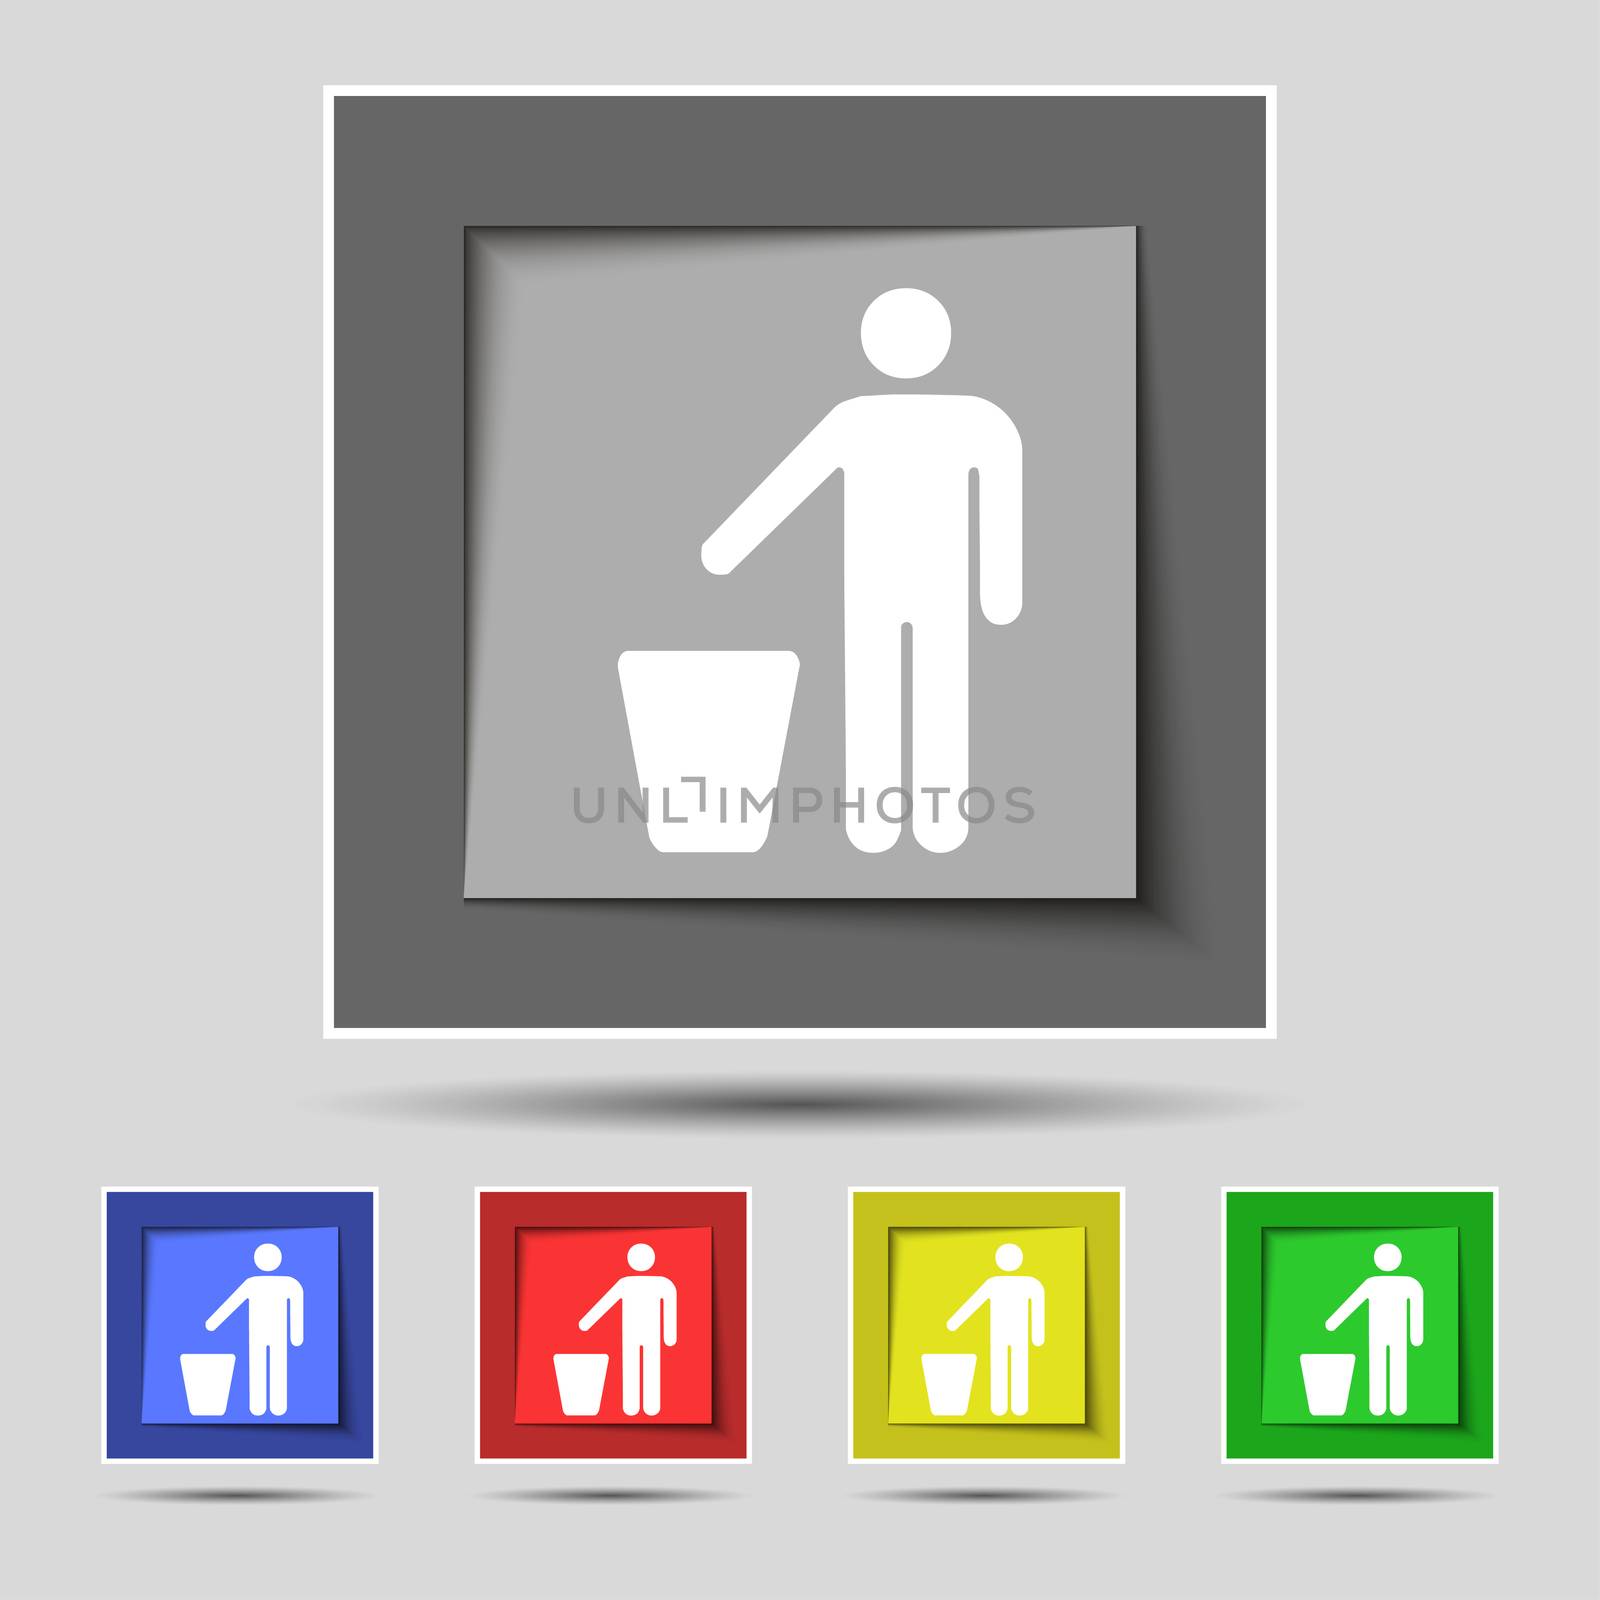 throw away the trash icon sign on original five colored buttons. illustration